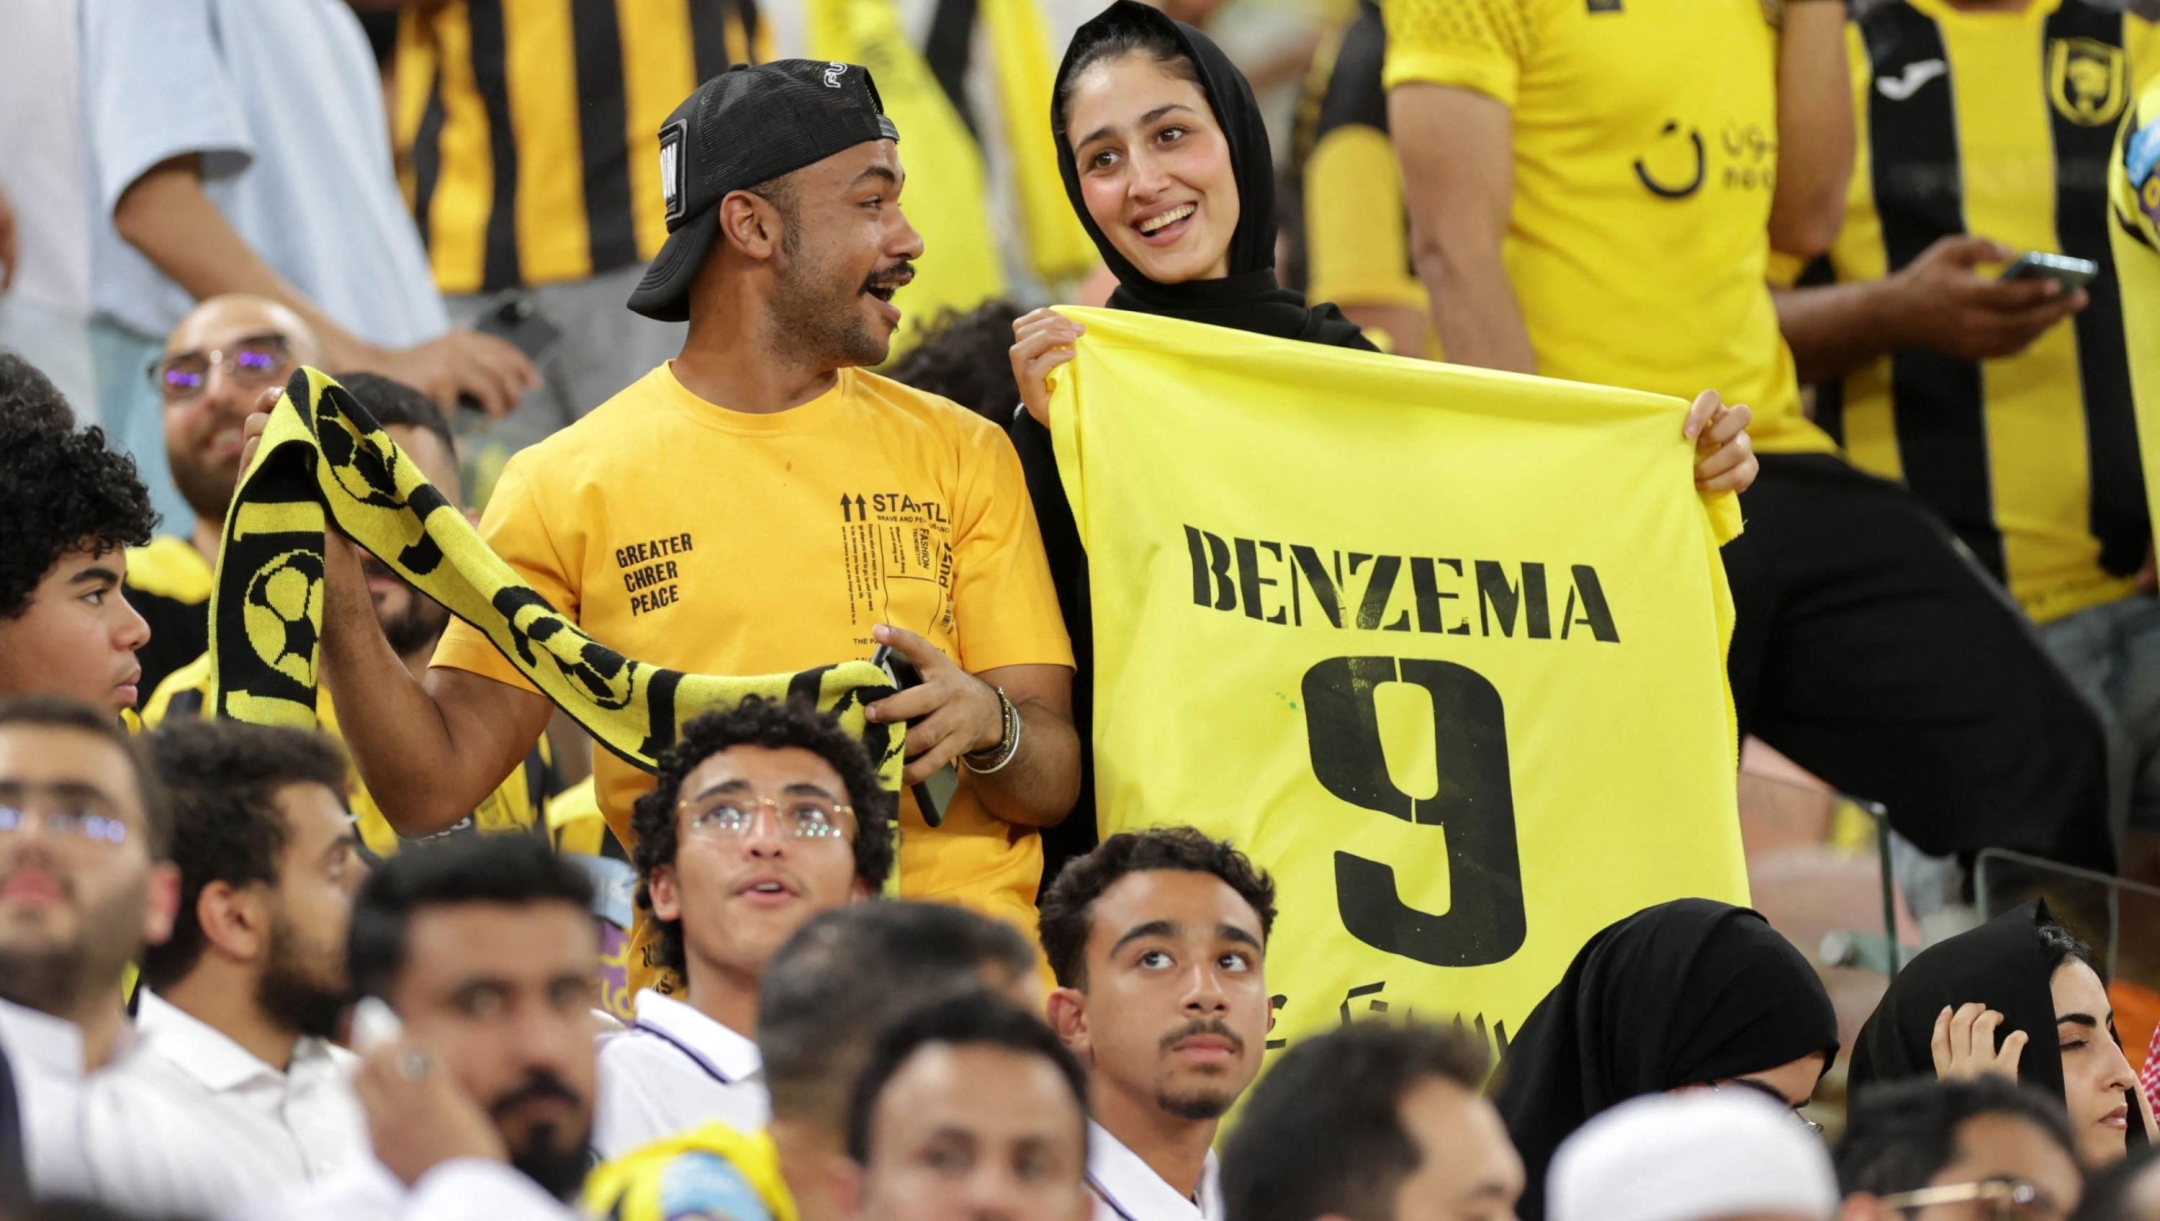 Fans gather at at Al-Ittihad's stadium in Jeddah to welcome Former Real Madrid striker Karim Benzema, on June 8, 2023. Benzema was unveiled as an Al-Ittihad player in front of thousands of fans in Saudi Arabia on June 8, a day after the oil-rich kingdom just failed to reel in Lionel Messi. (Photo by AFP)